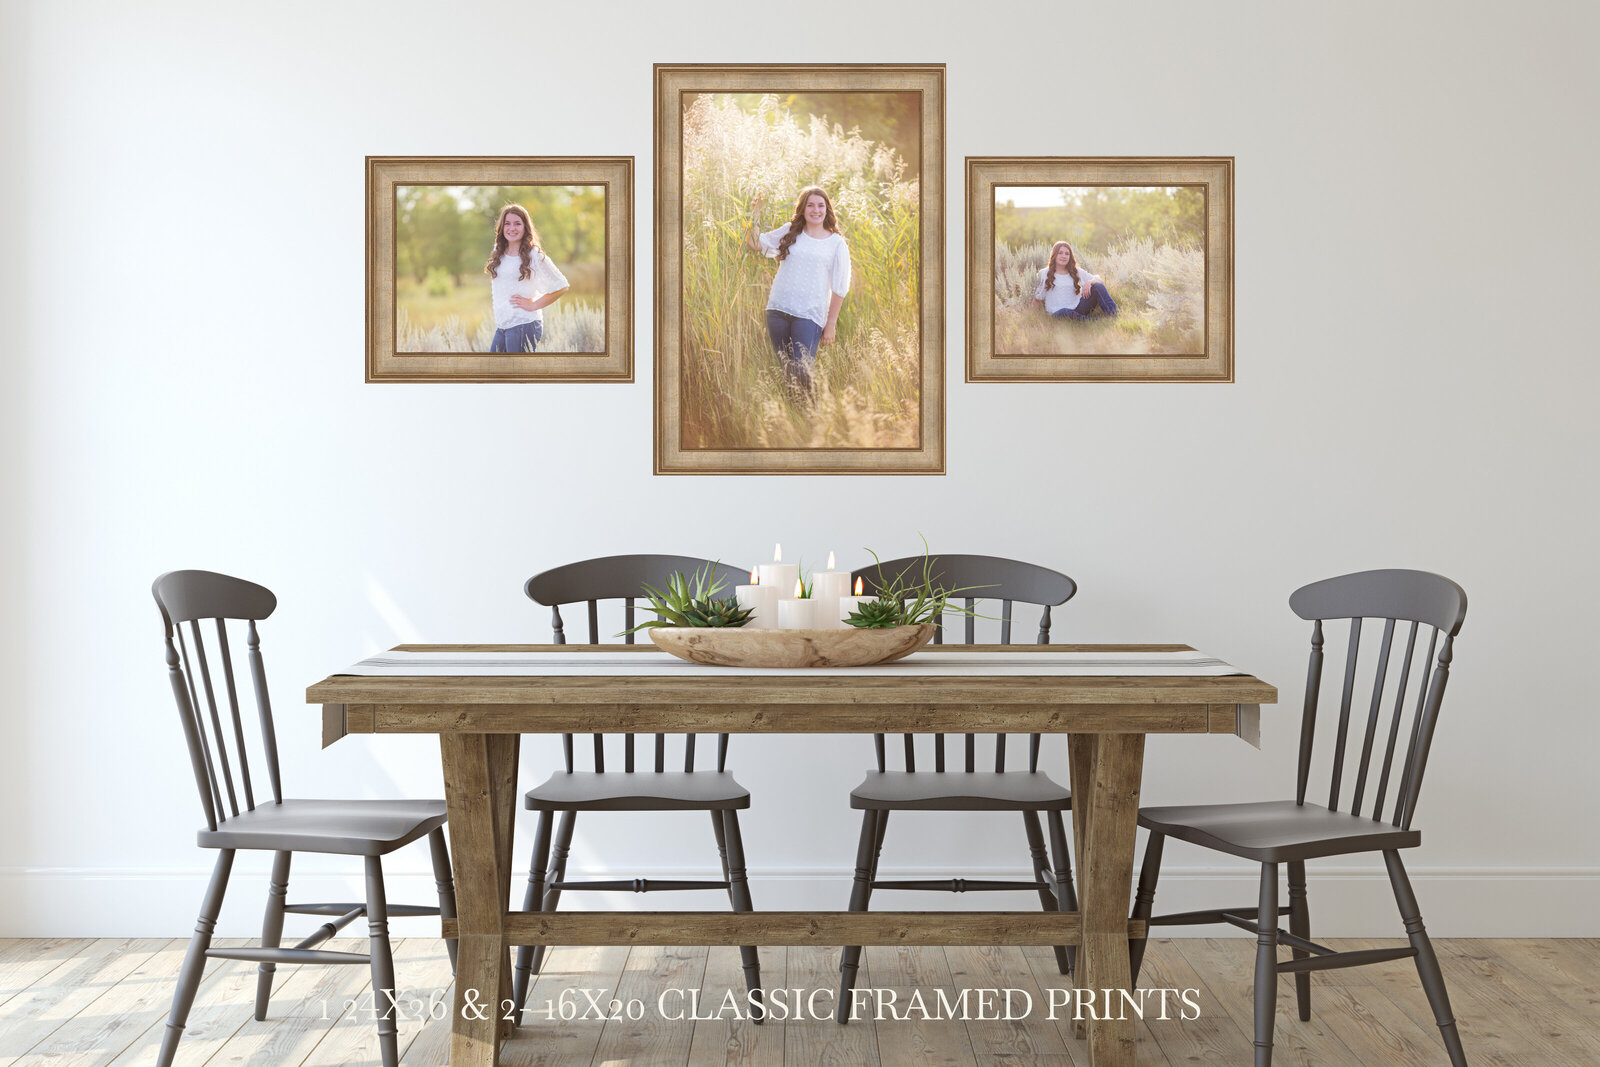 Three framed prints of senior pictures on dining room wall.